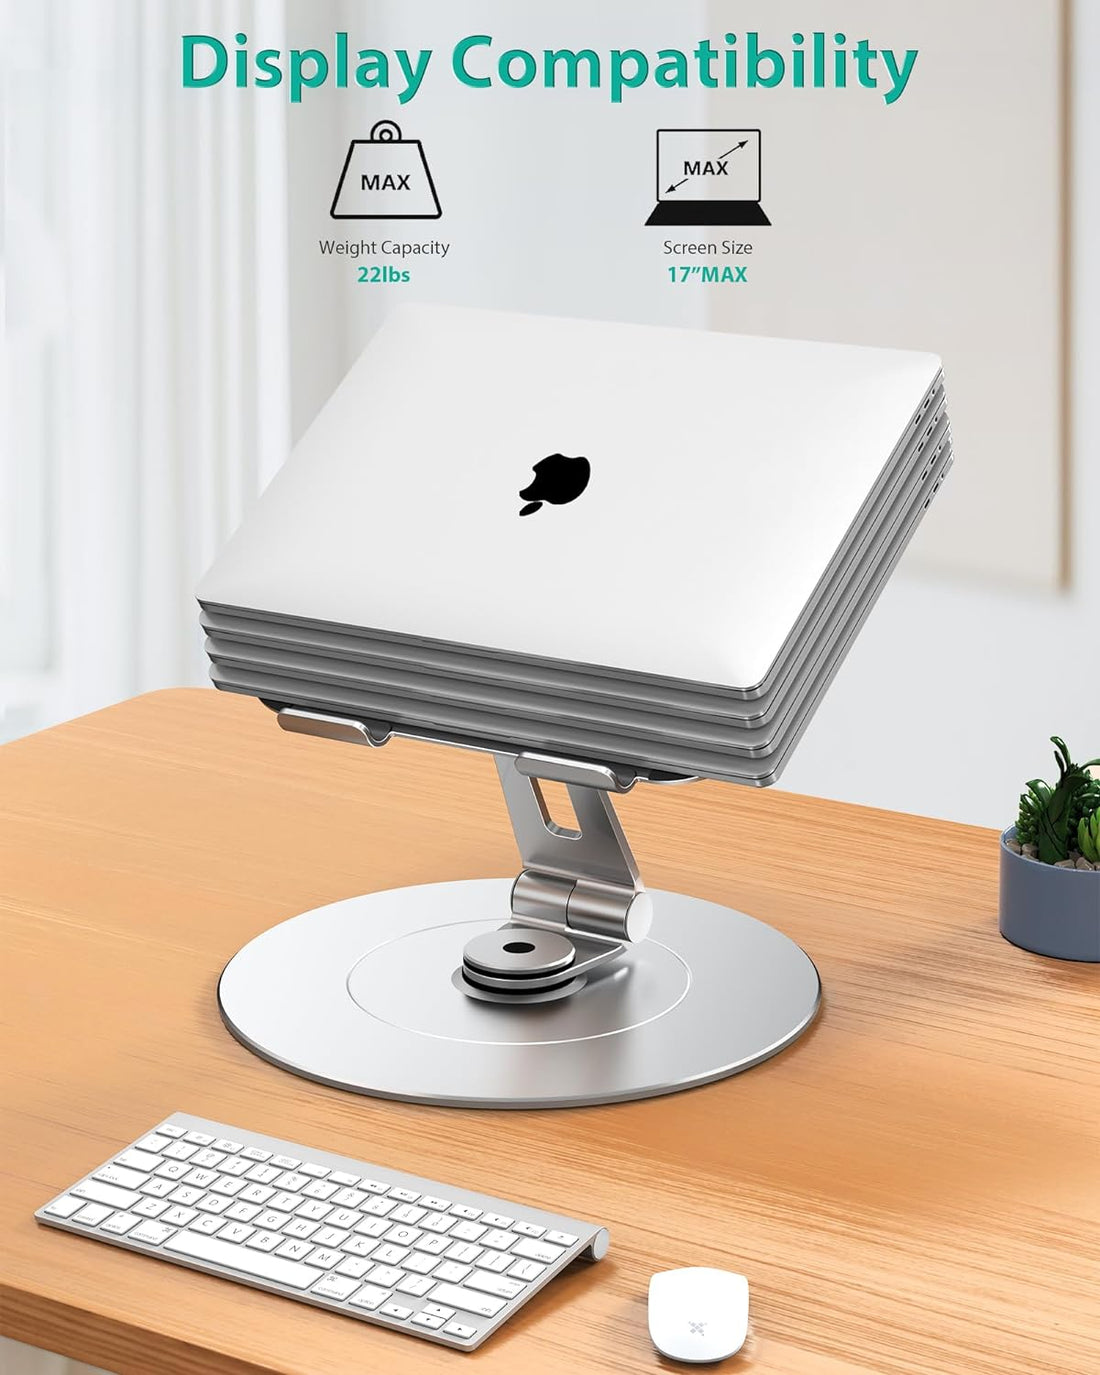 NTMY 360 Rotating Laptop Stand for Desk with Phone Holder, Aluminum Sturdy Adjustable Foldable Computer Stand Fits All MacBook Laptops Tablets 10-17"